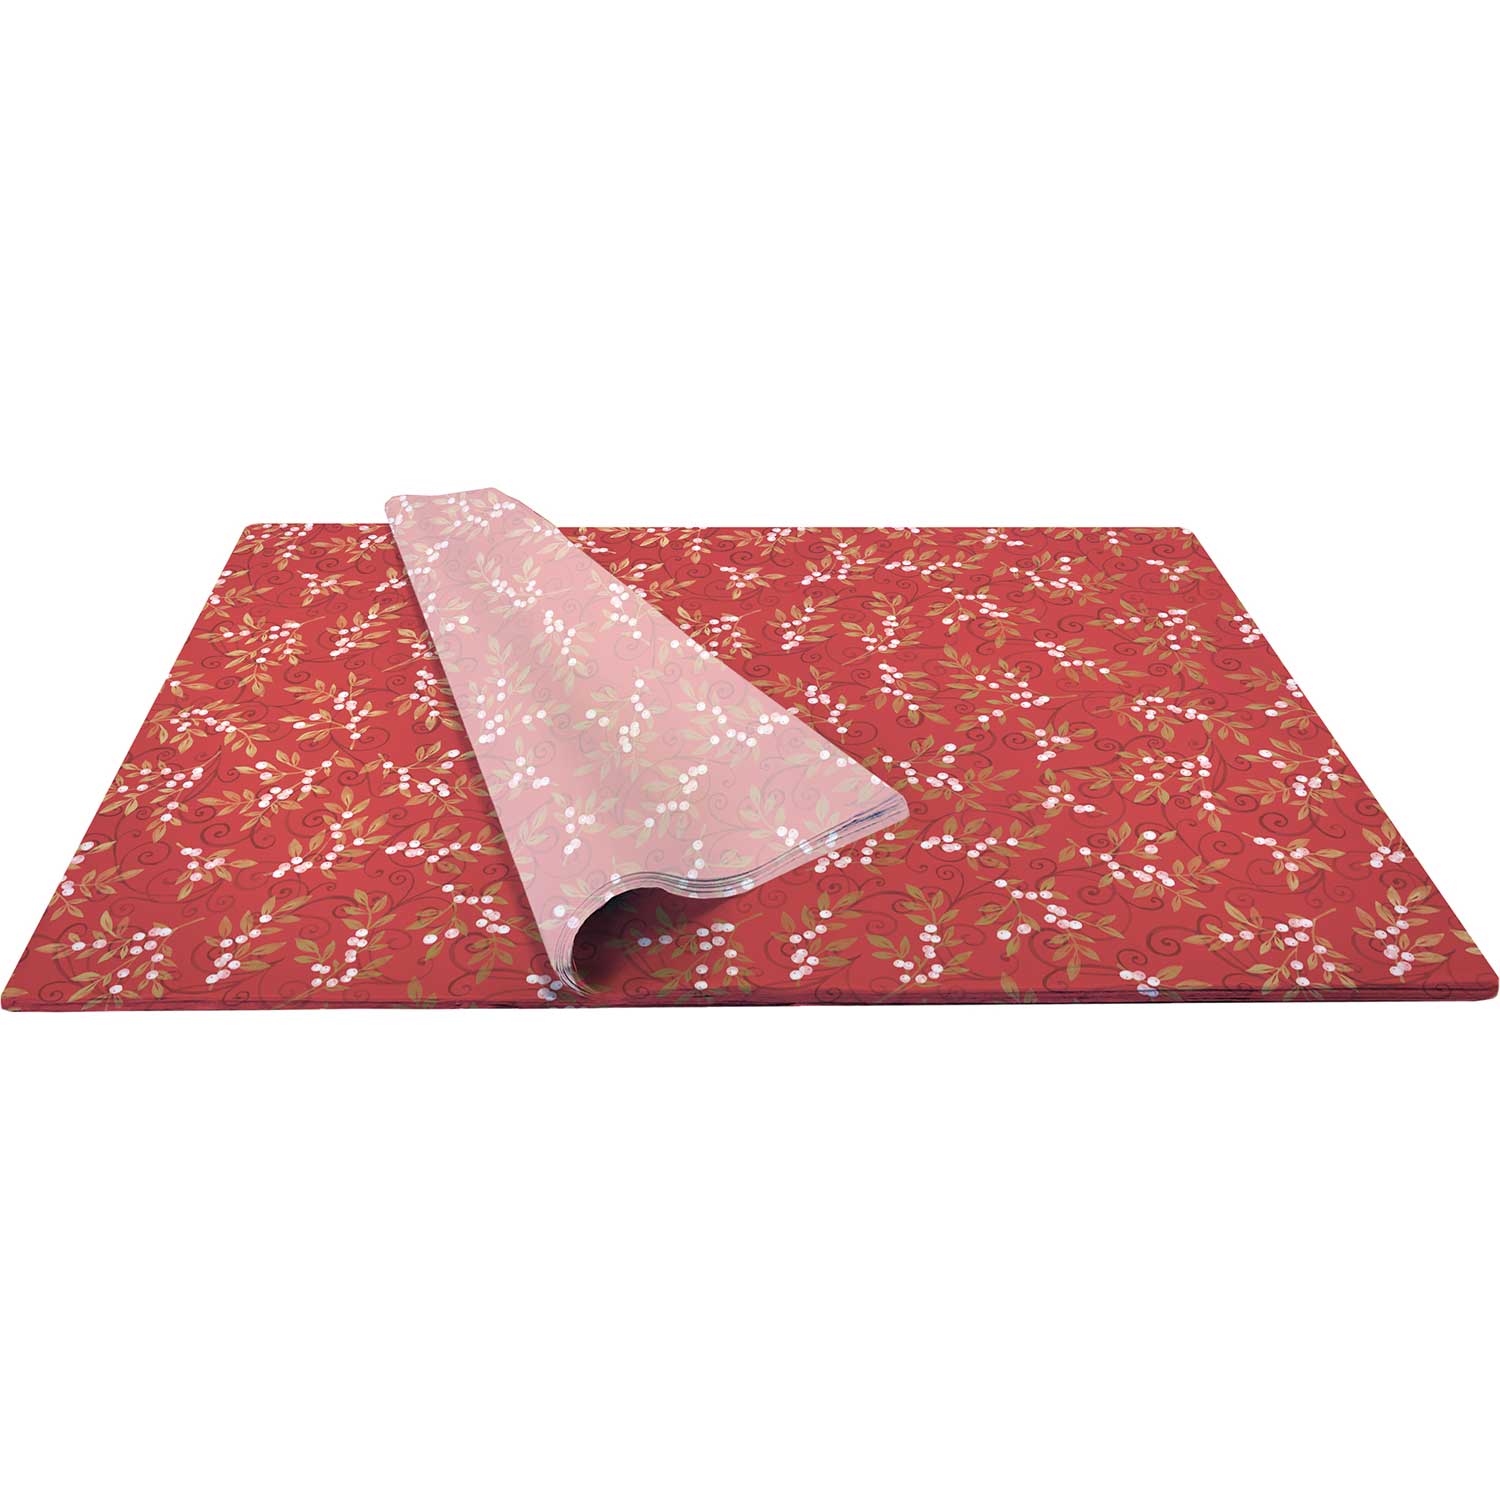 BXPT538b Holiday Red Floral Gift Tissue Paper Bulk